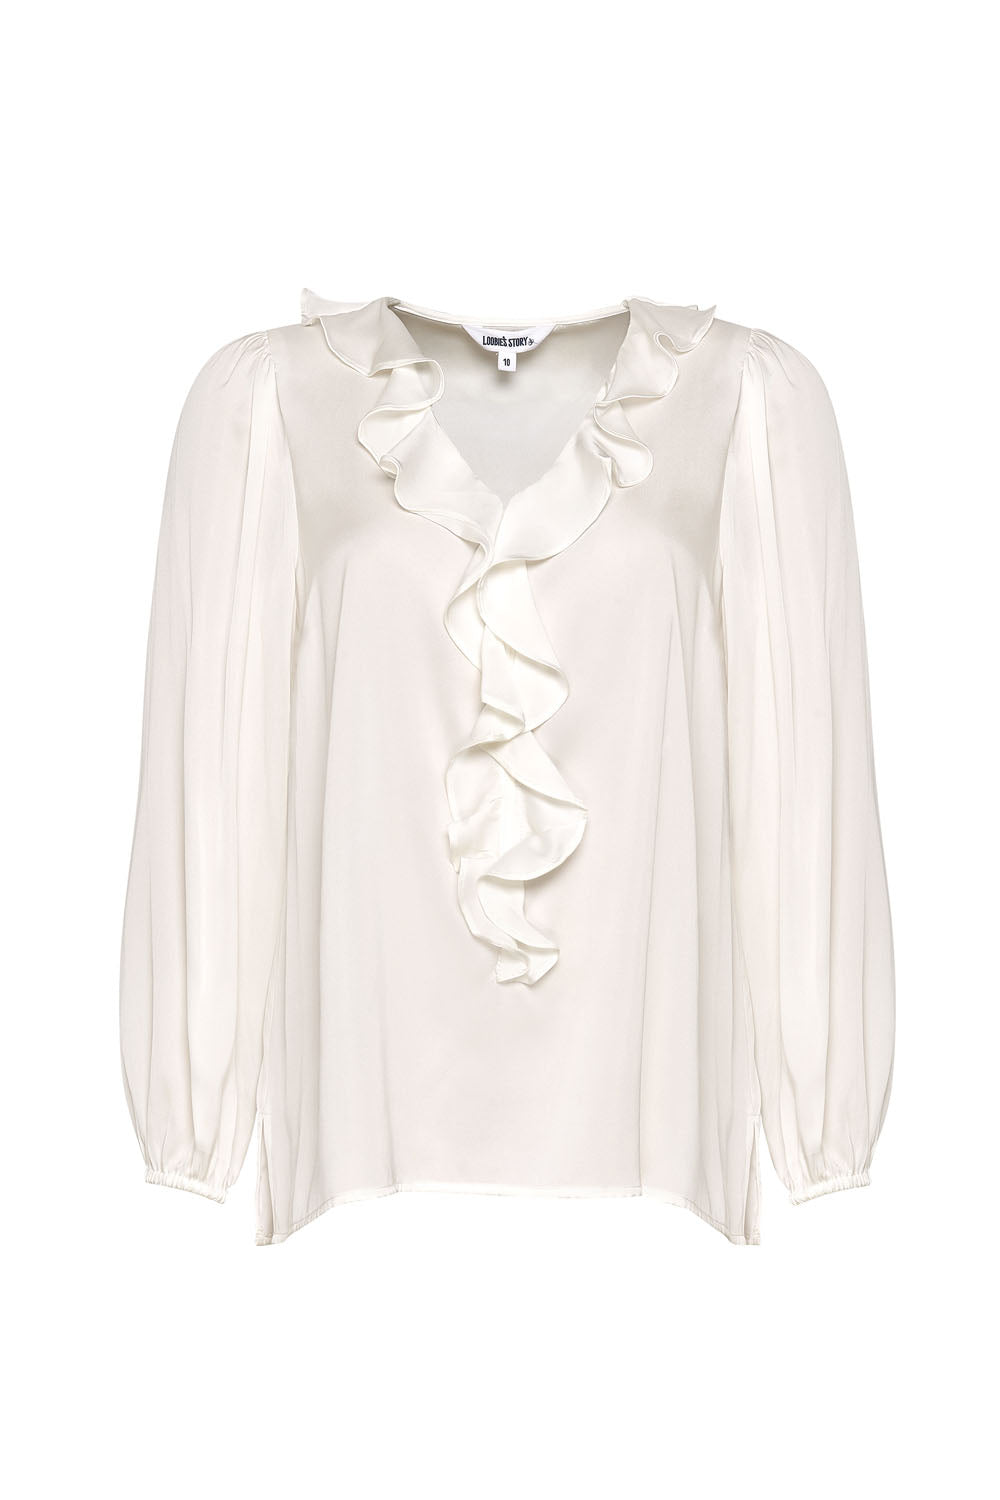 Loobies Story Luxe Blouse - Silk White